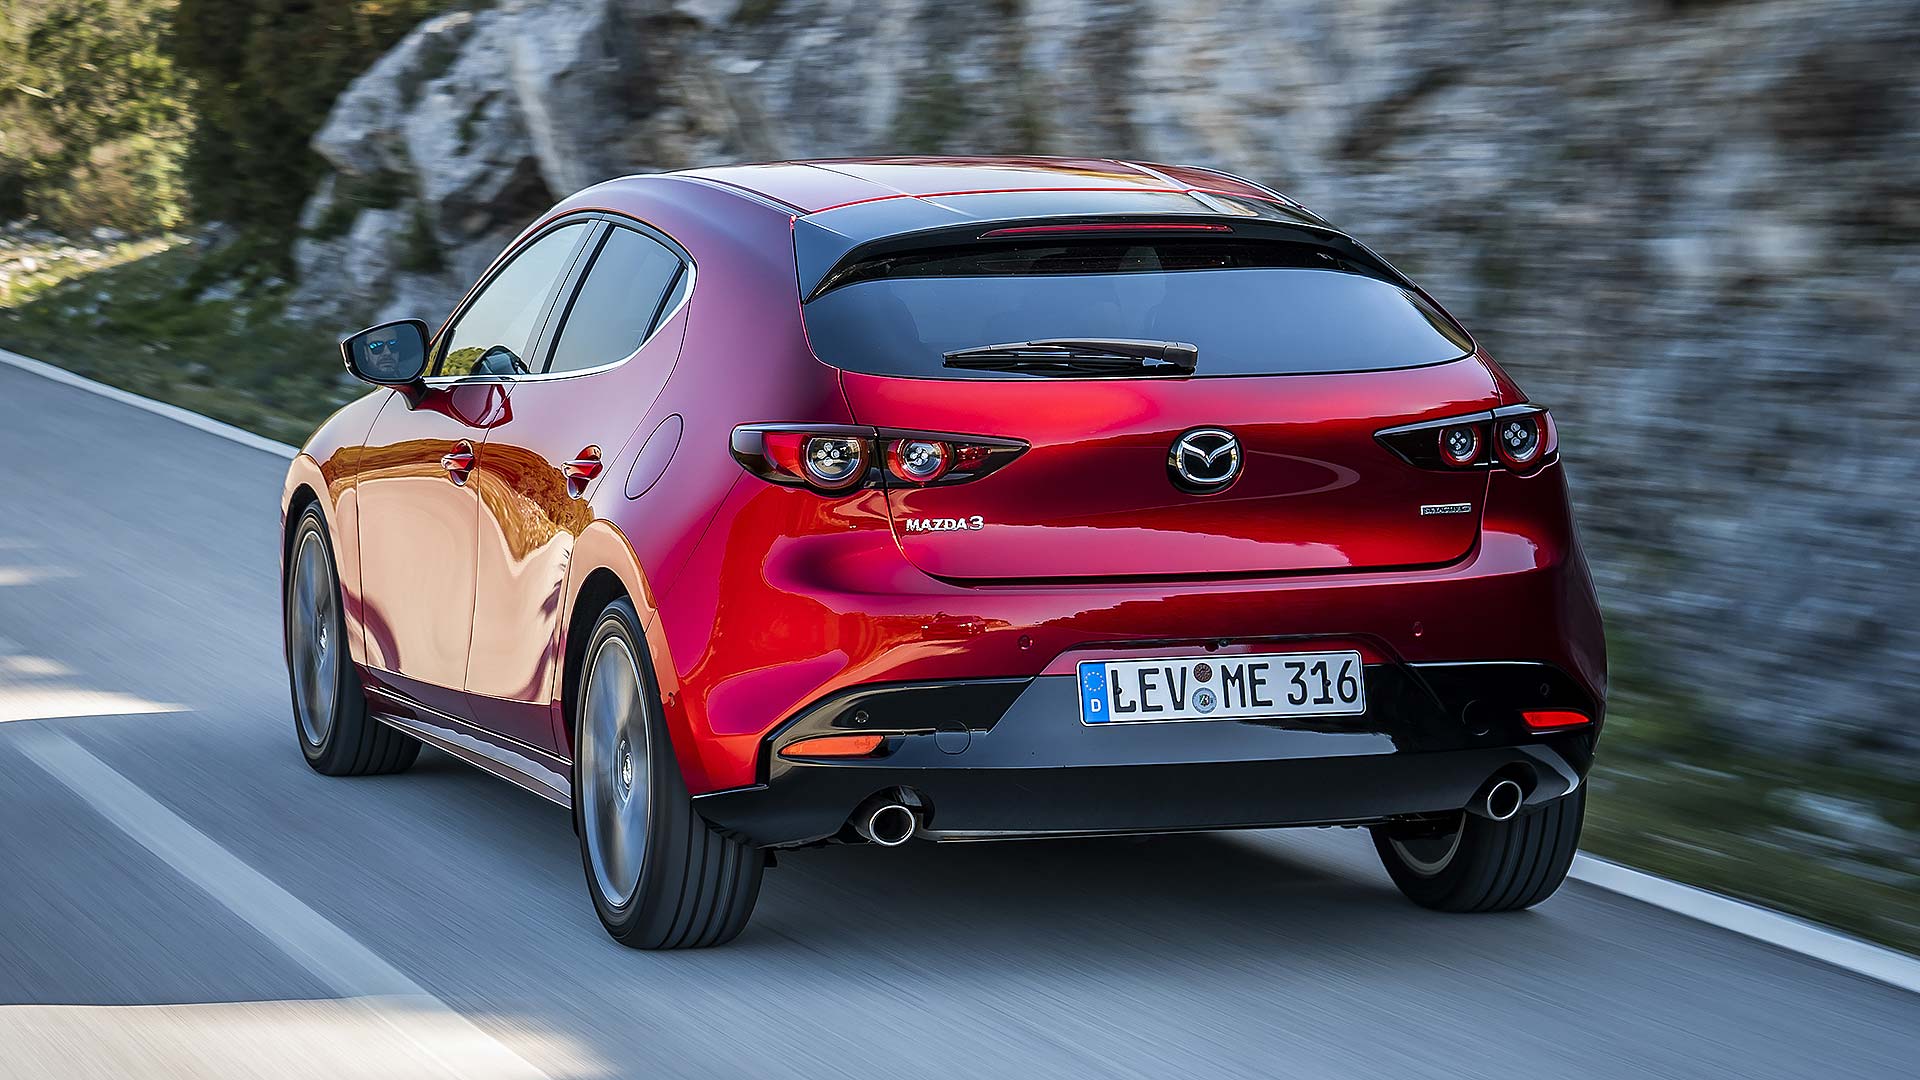 New Mazda prices, specs and UK launch date revealed